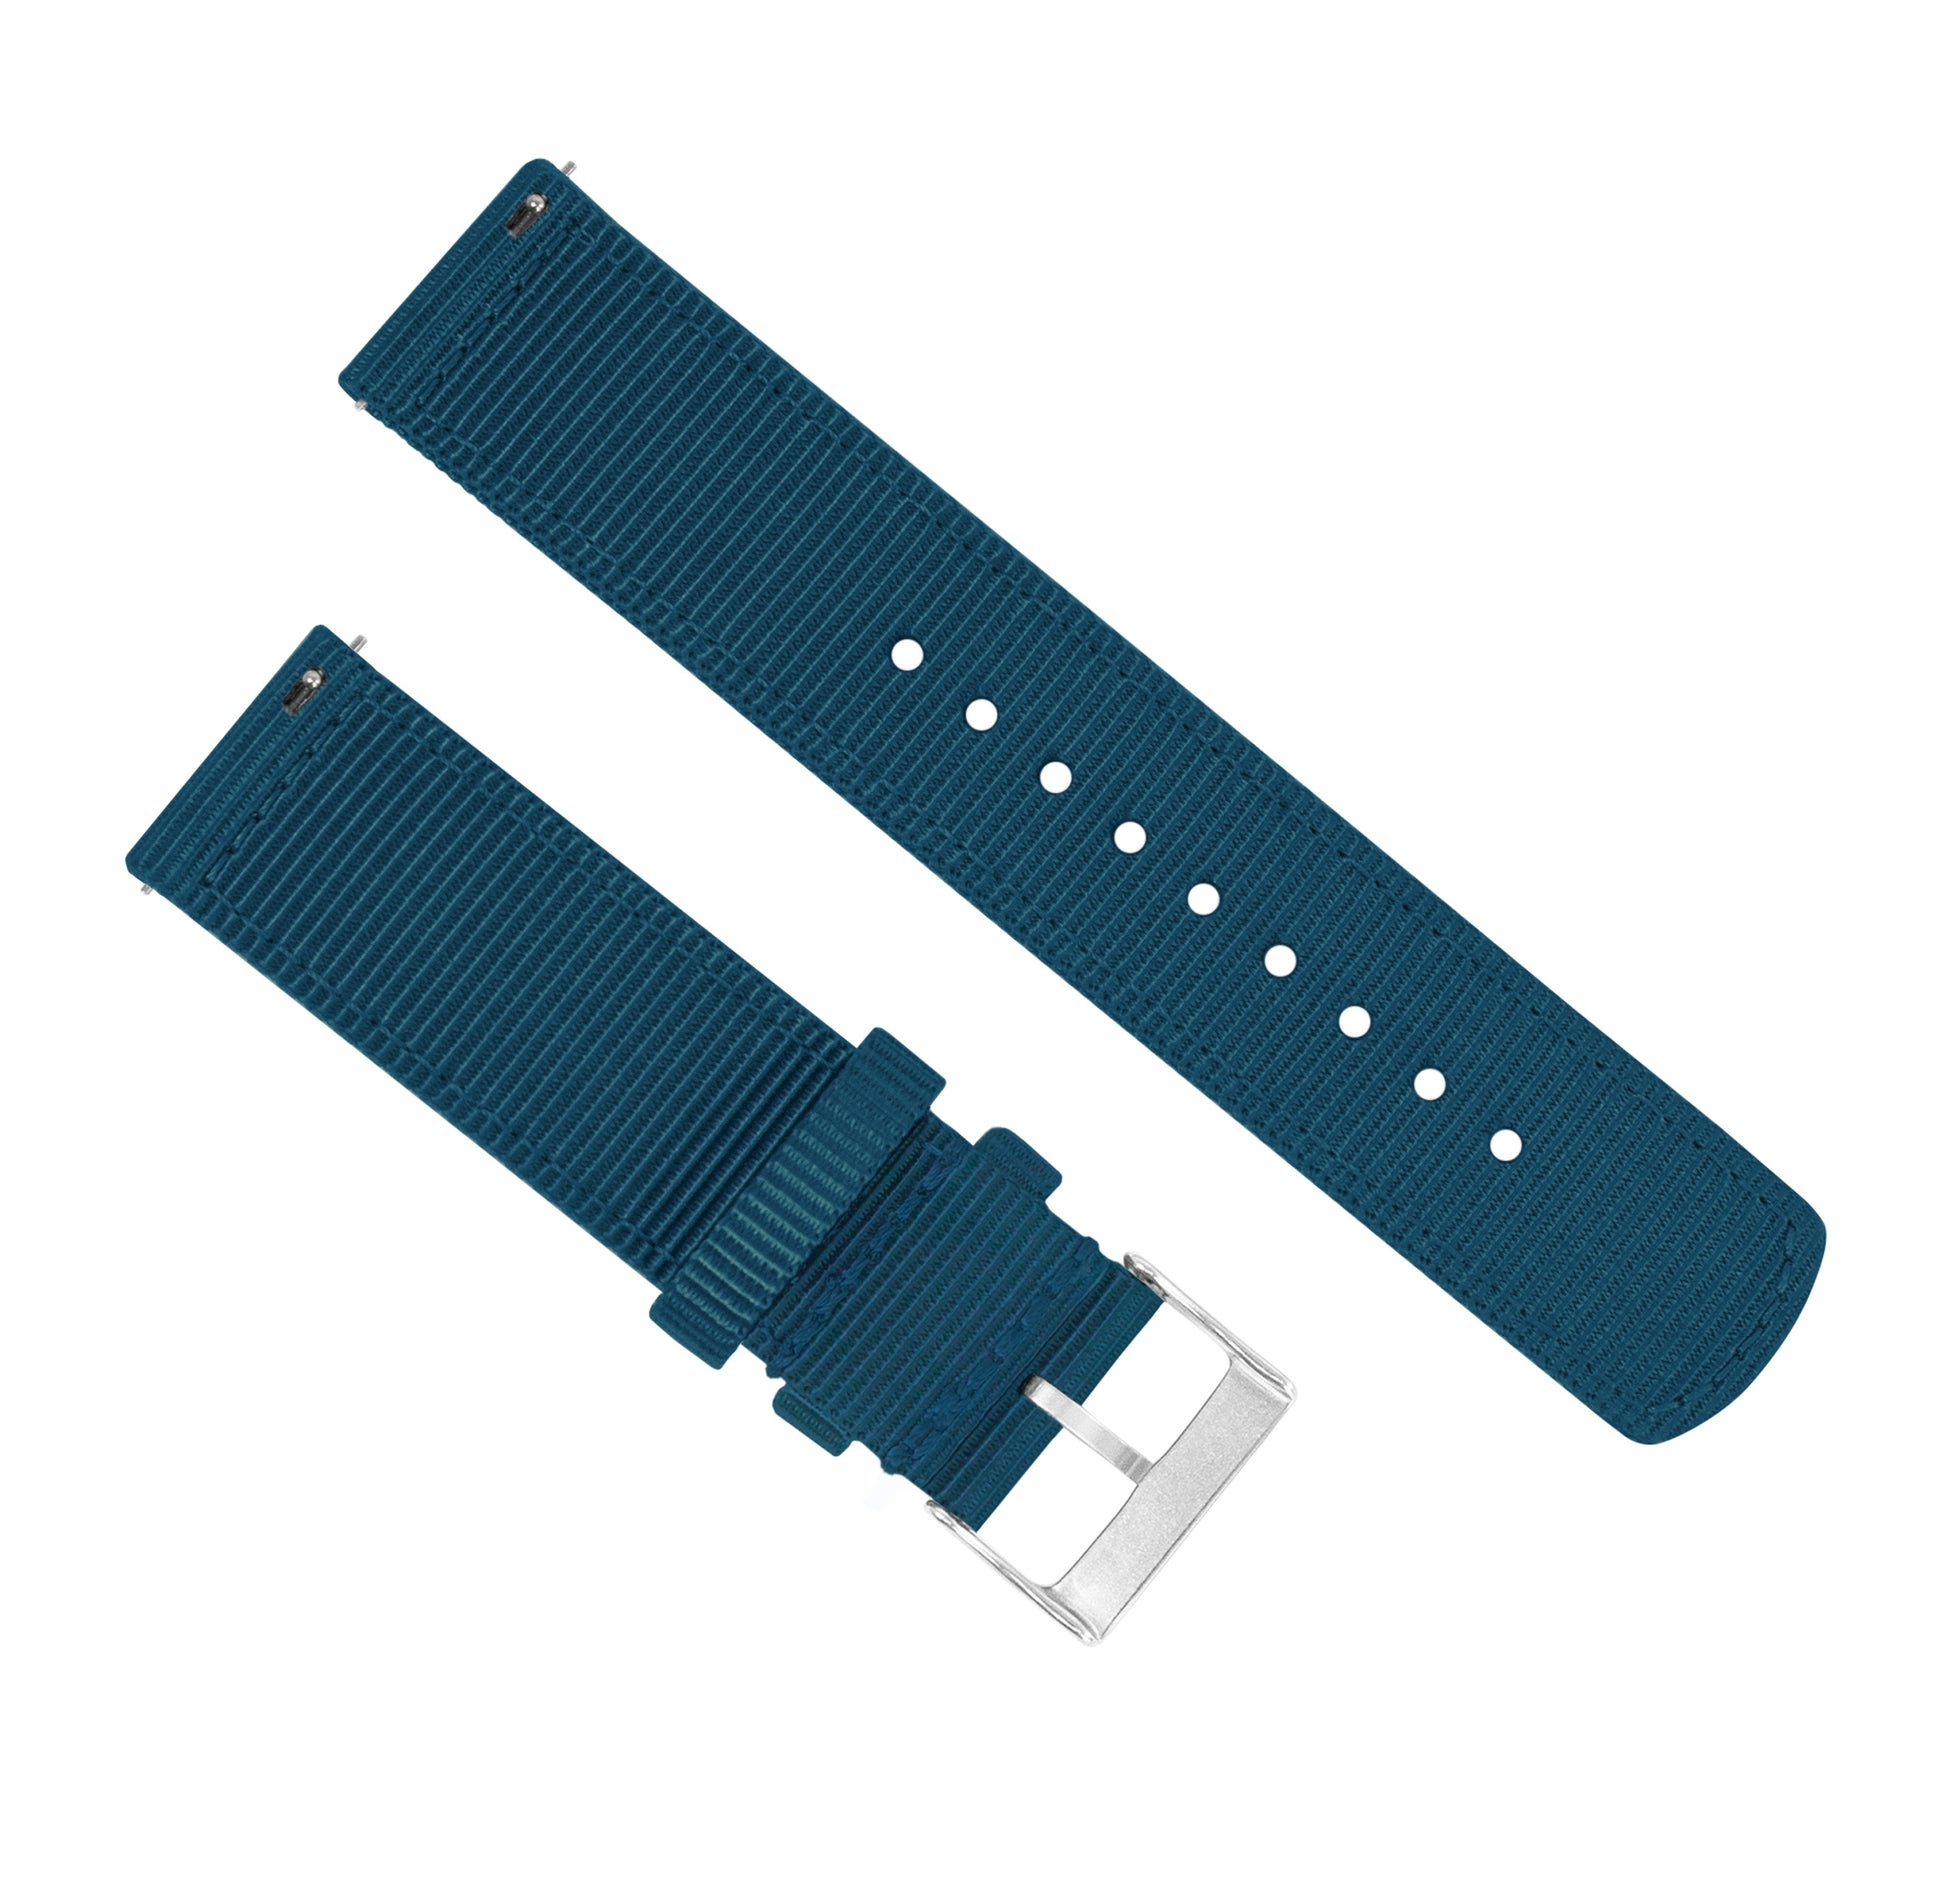 Fossil Gen 5 | Two-Piece NATO Style | Steel Blue - Barton Watch Bands